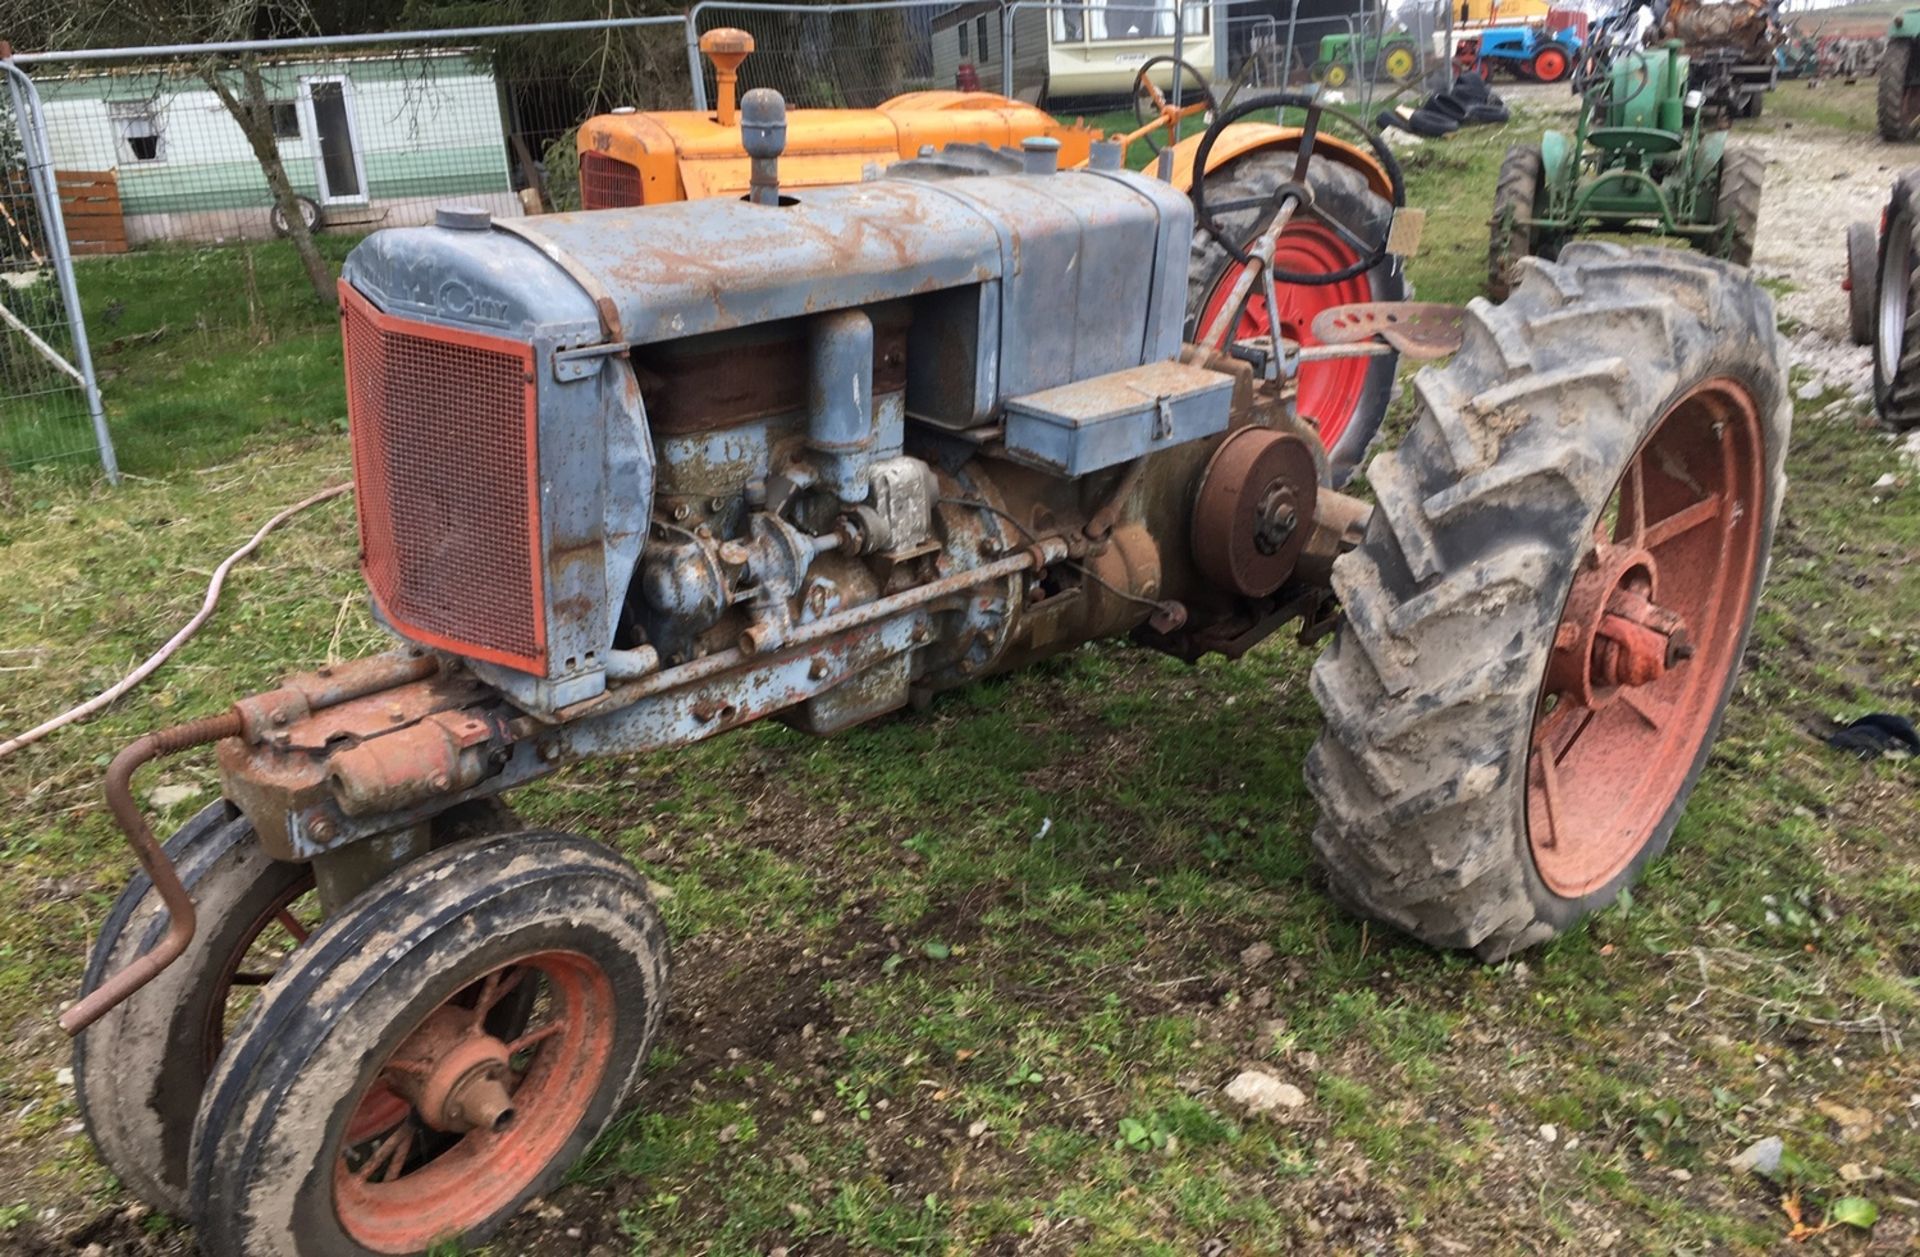 Twin City Tractor - incomplete restoration project. - Image 3 of 5